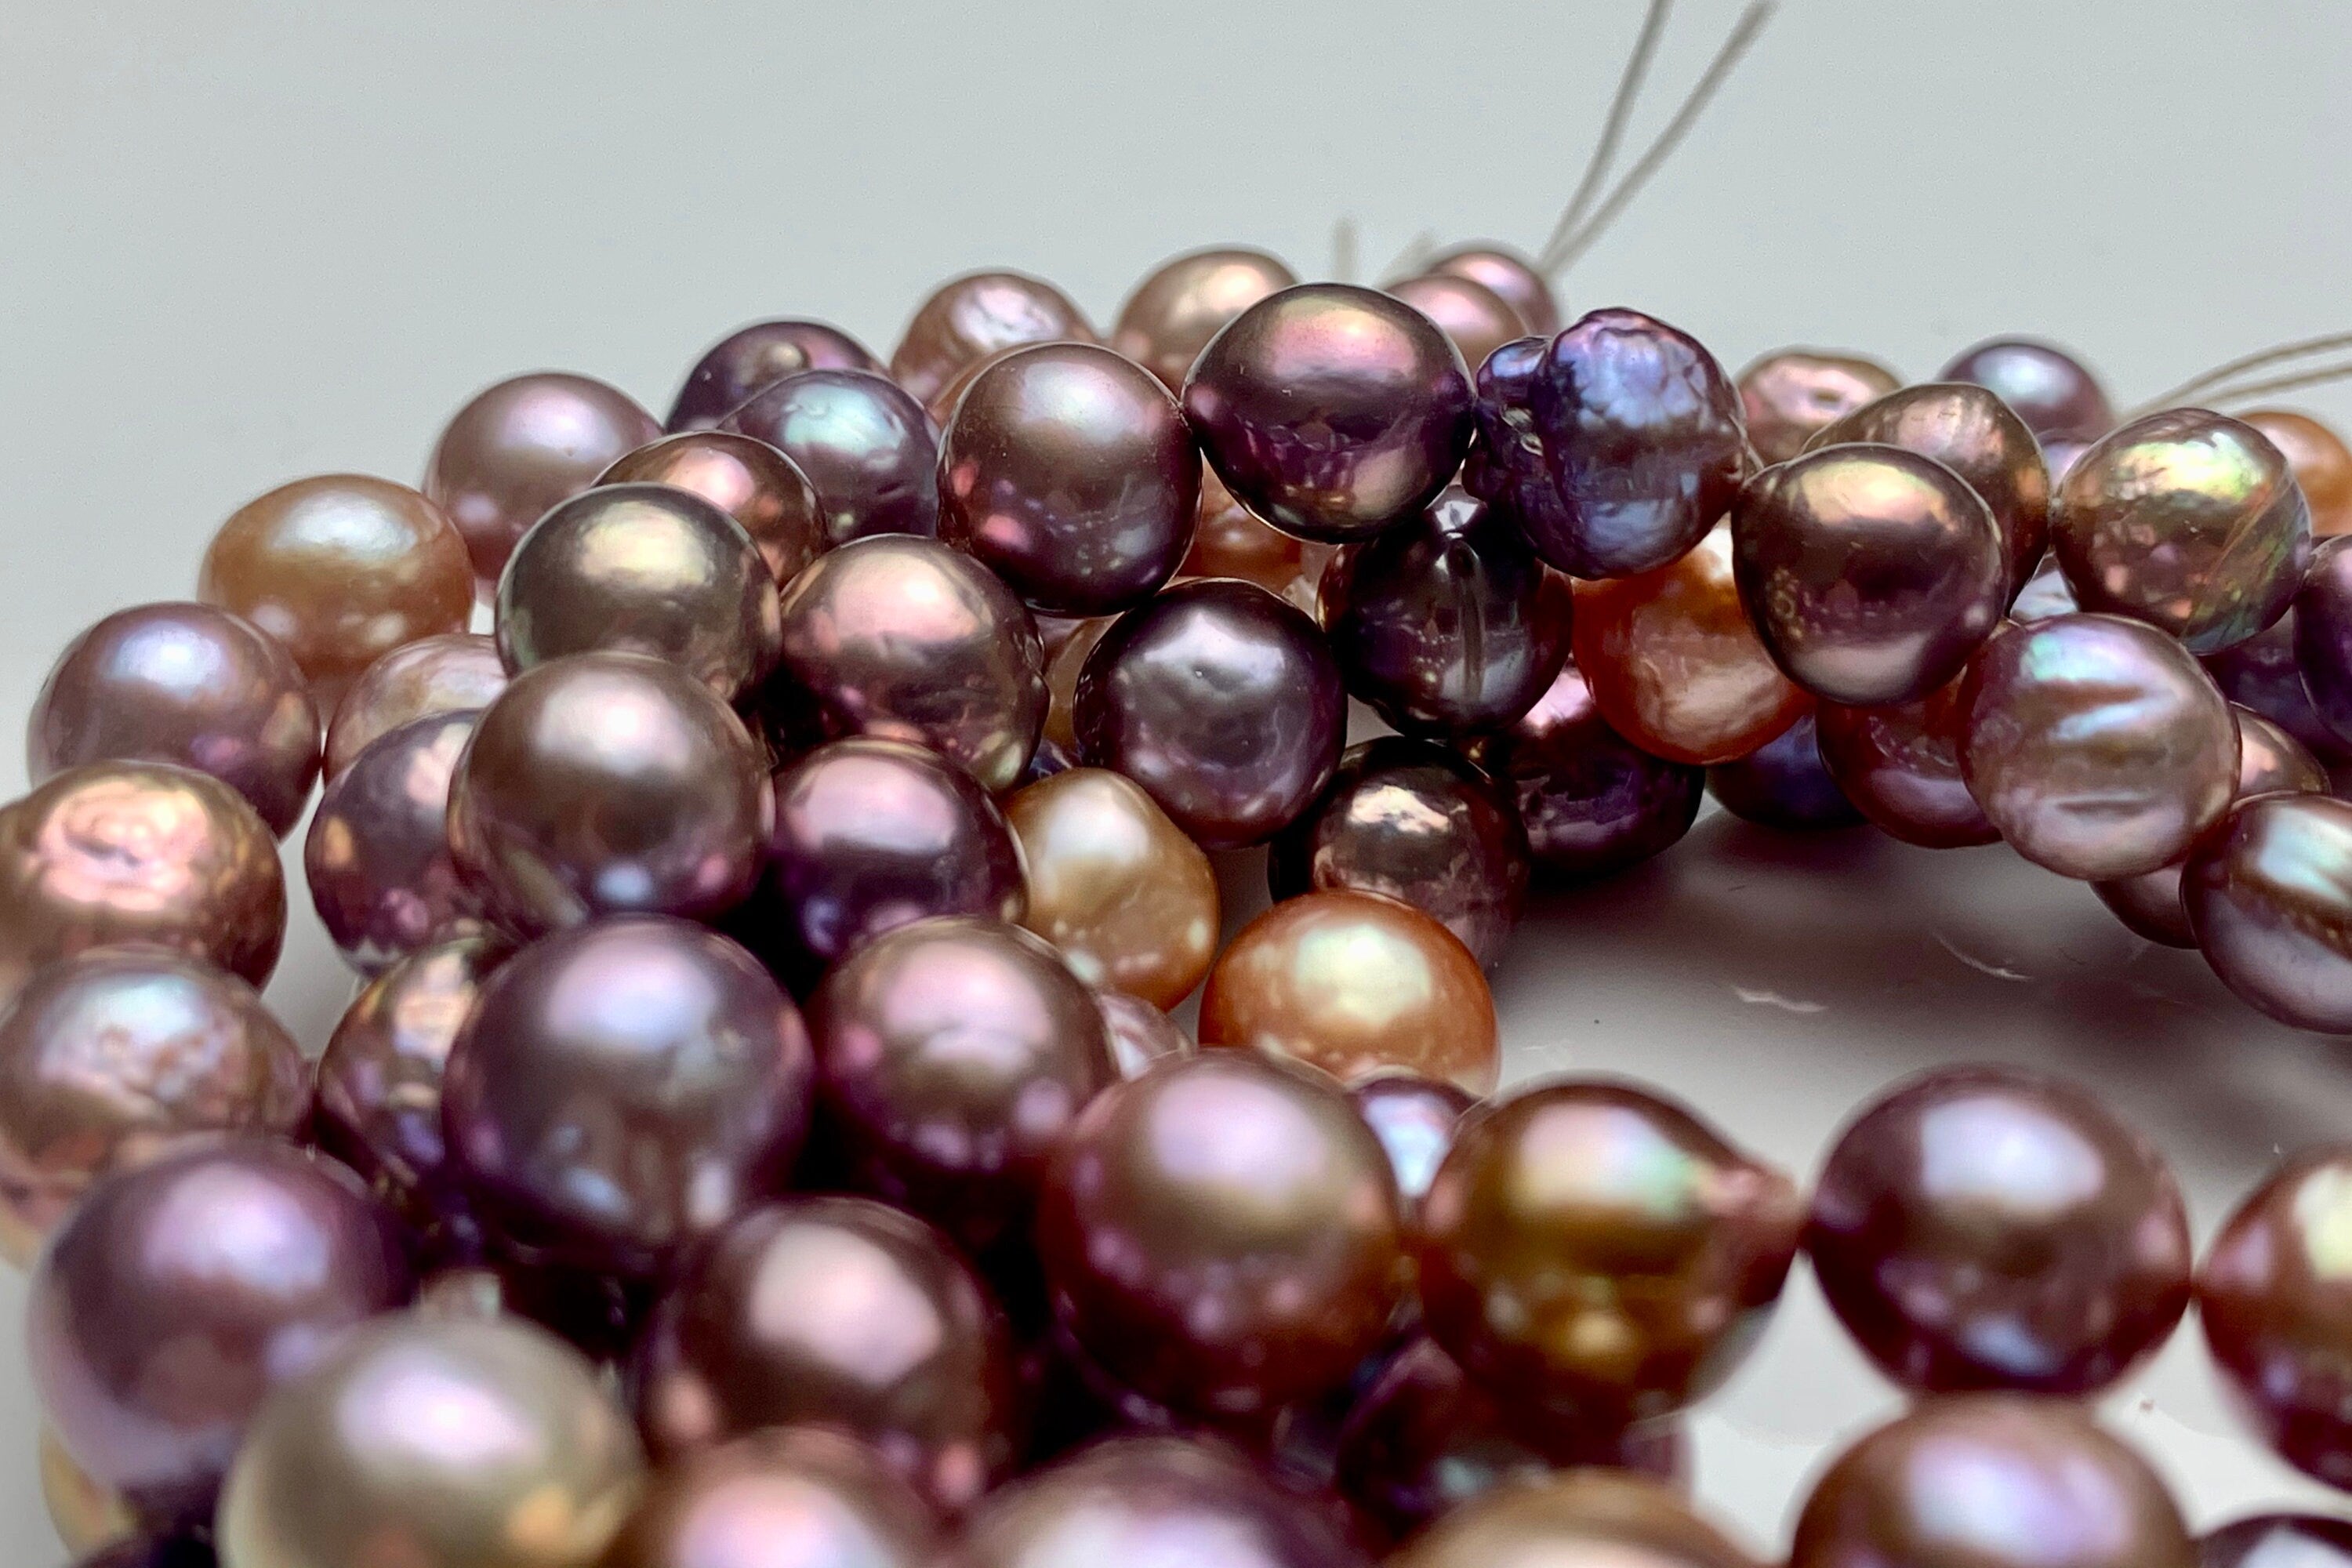 8-9.5mm AAAA Half Strand Large Hole Very Rare Dark Mauve Pink Baroque Pearl  Bead Hole 1.2mm Iridescent Color Edison Pearl 21 Pieces #P1313